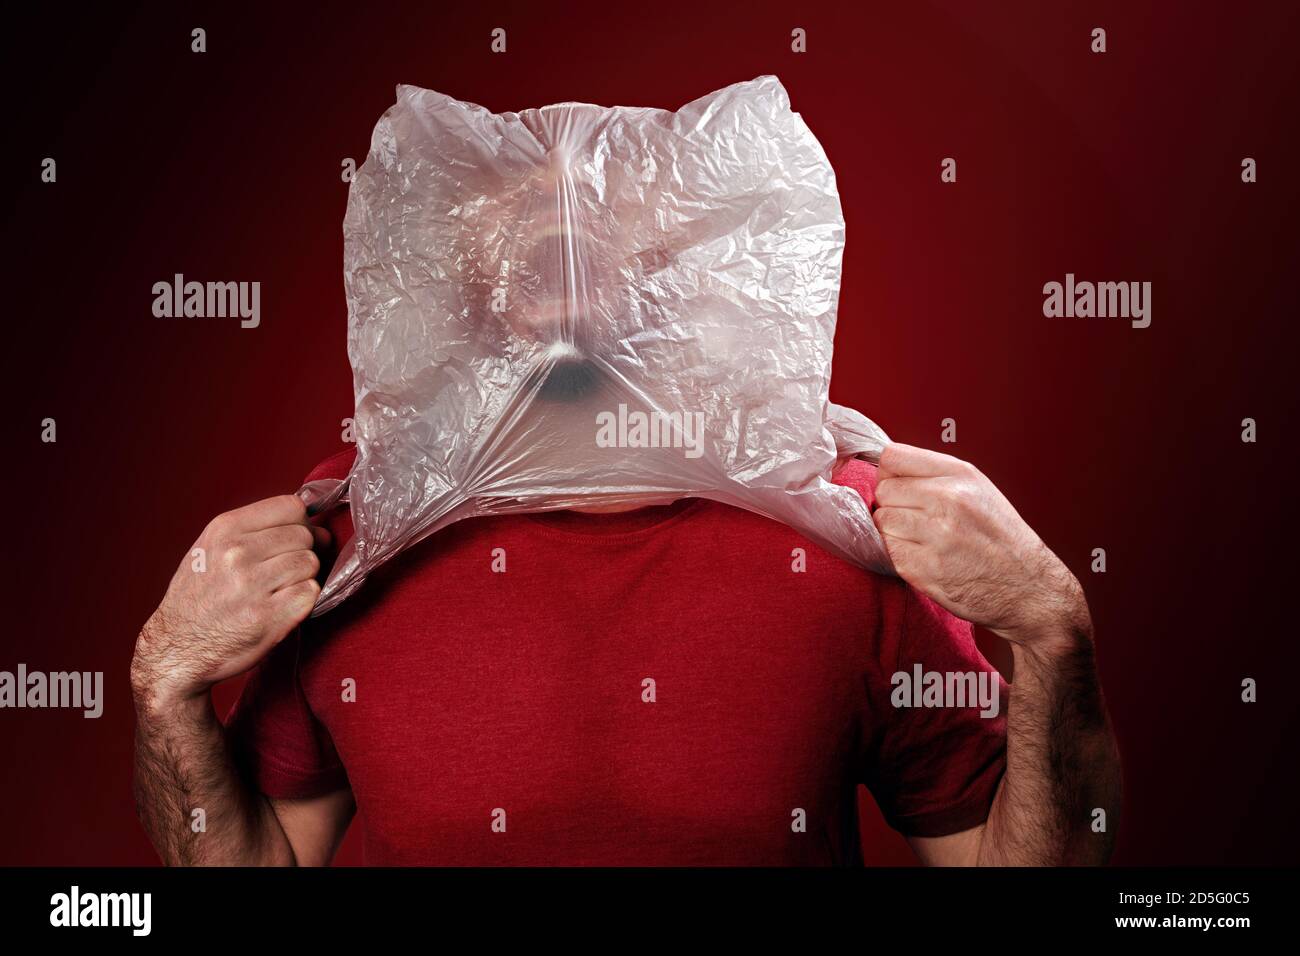 The man rips off the plastic bag from his head, suffocating. Red background. Copy space. Concept of pollution and environmental protection. Stock Photo